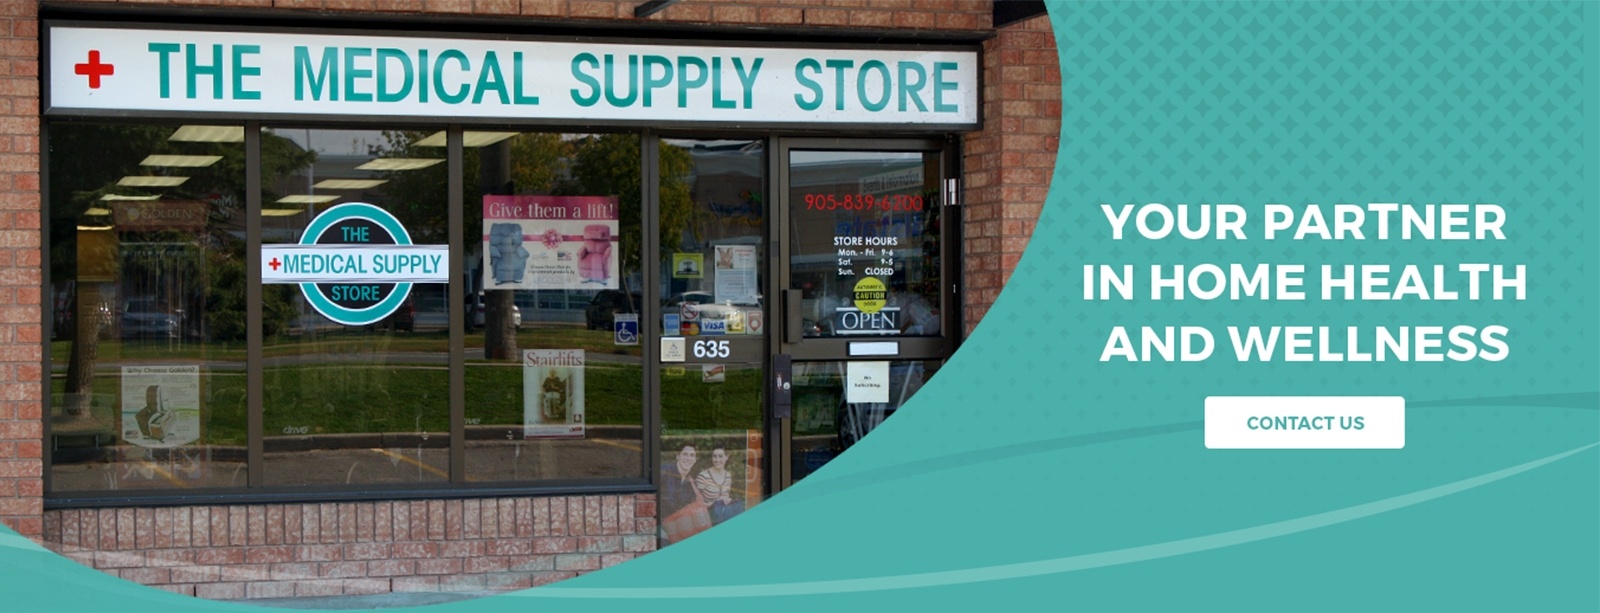 the medical supply store